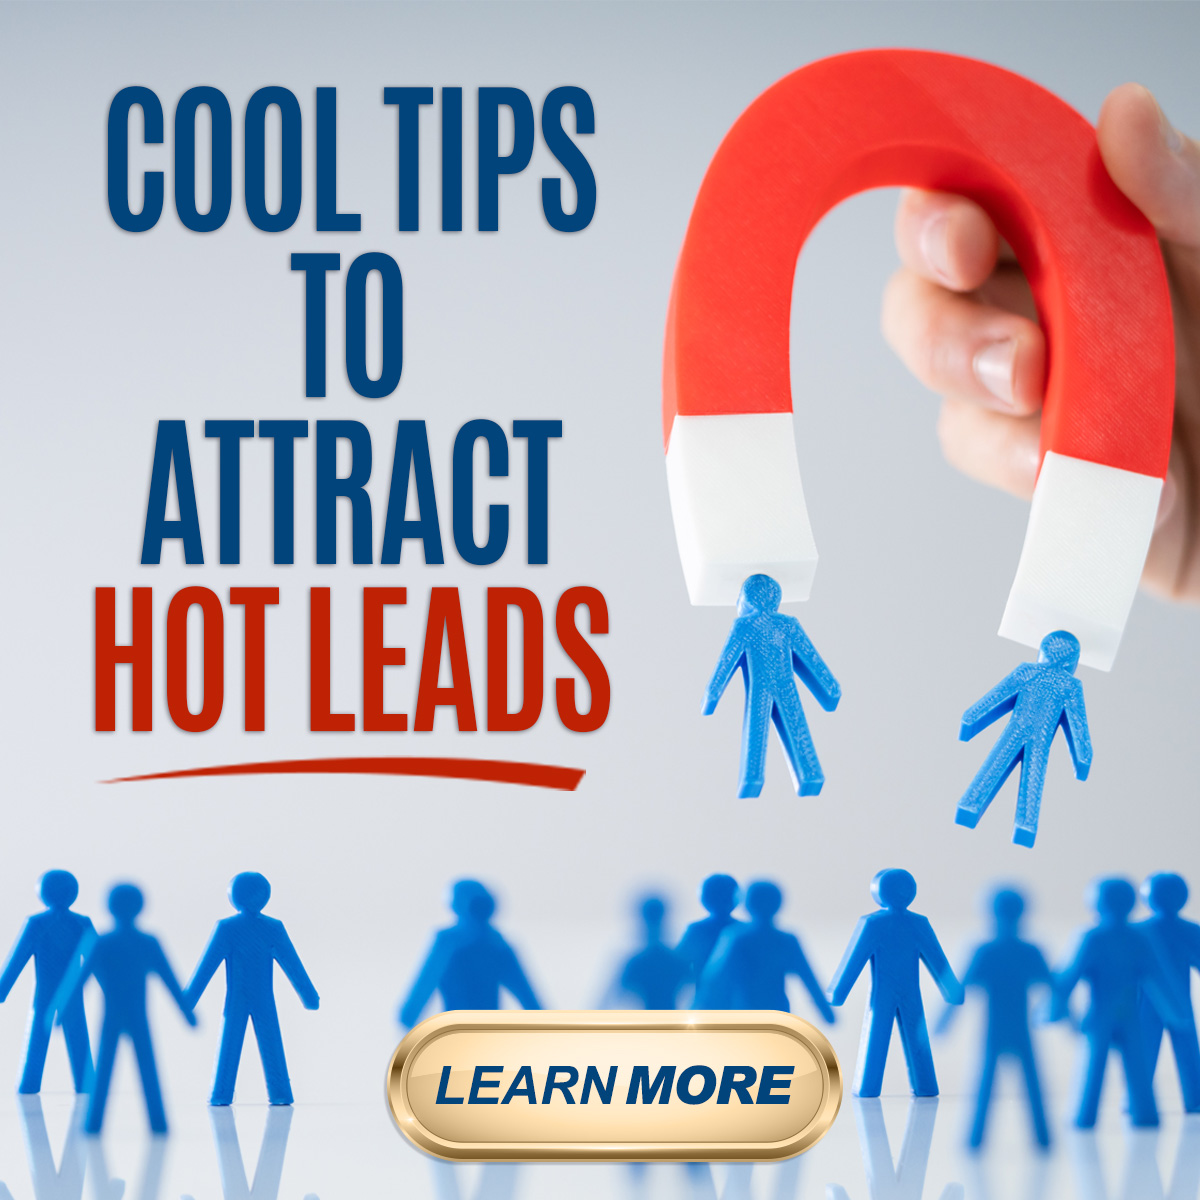 Cool tips to attract hot leads. Pictured is a magnetic attracting little blue people.